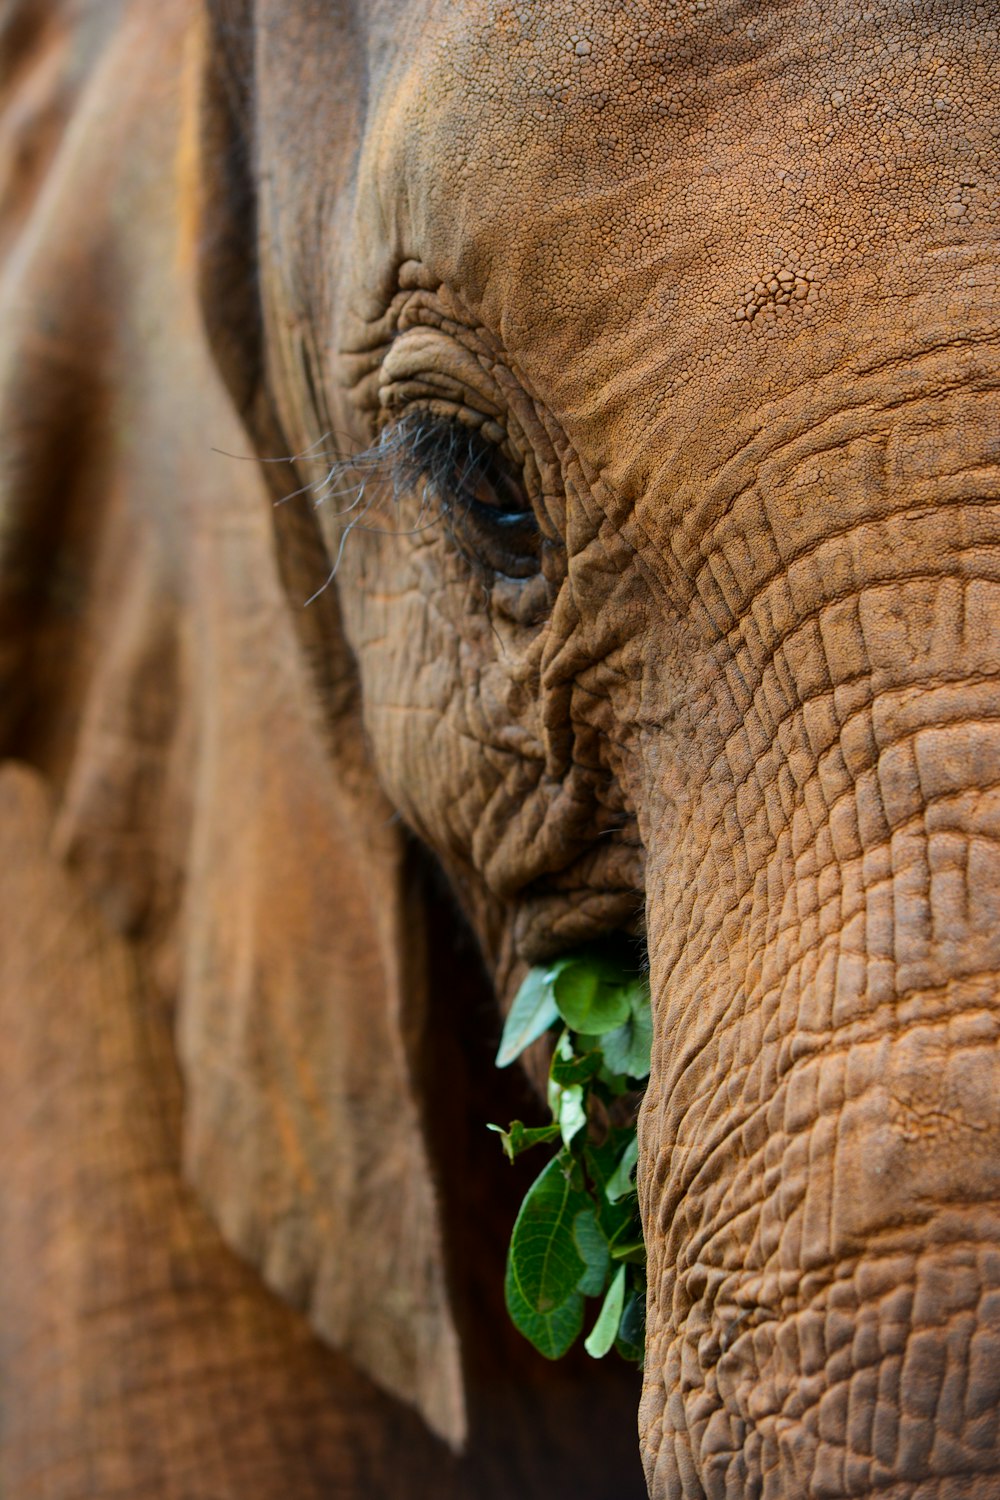 a close up of an elephant with a plant in its mouth